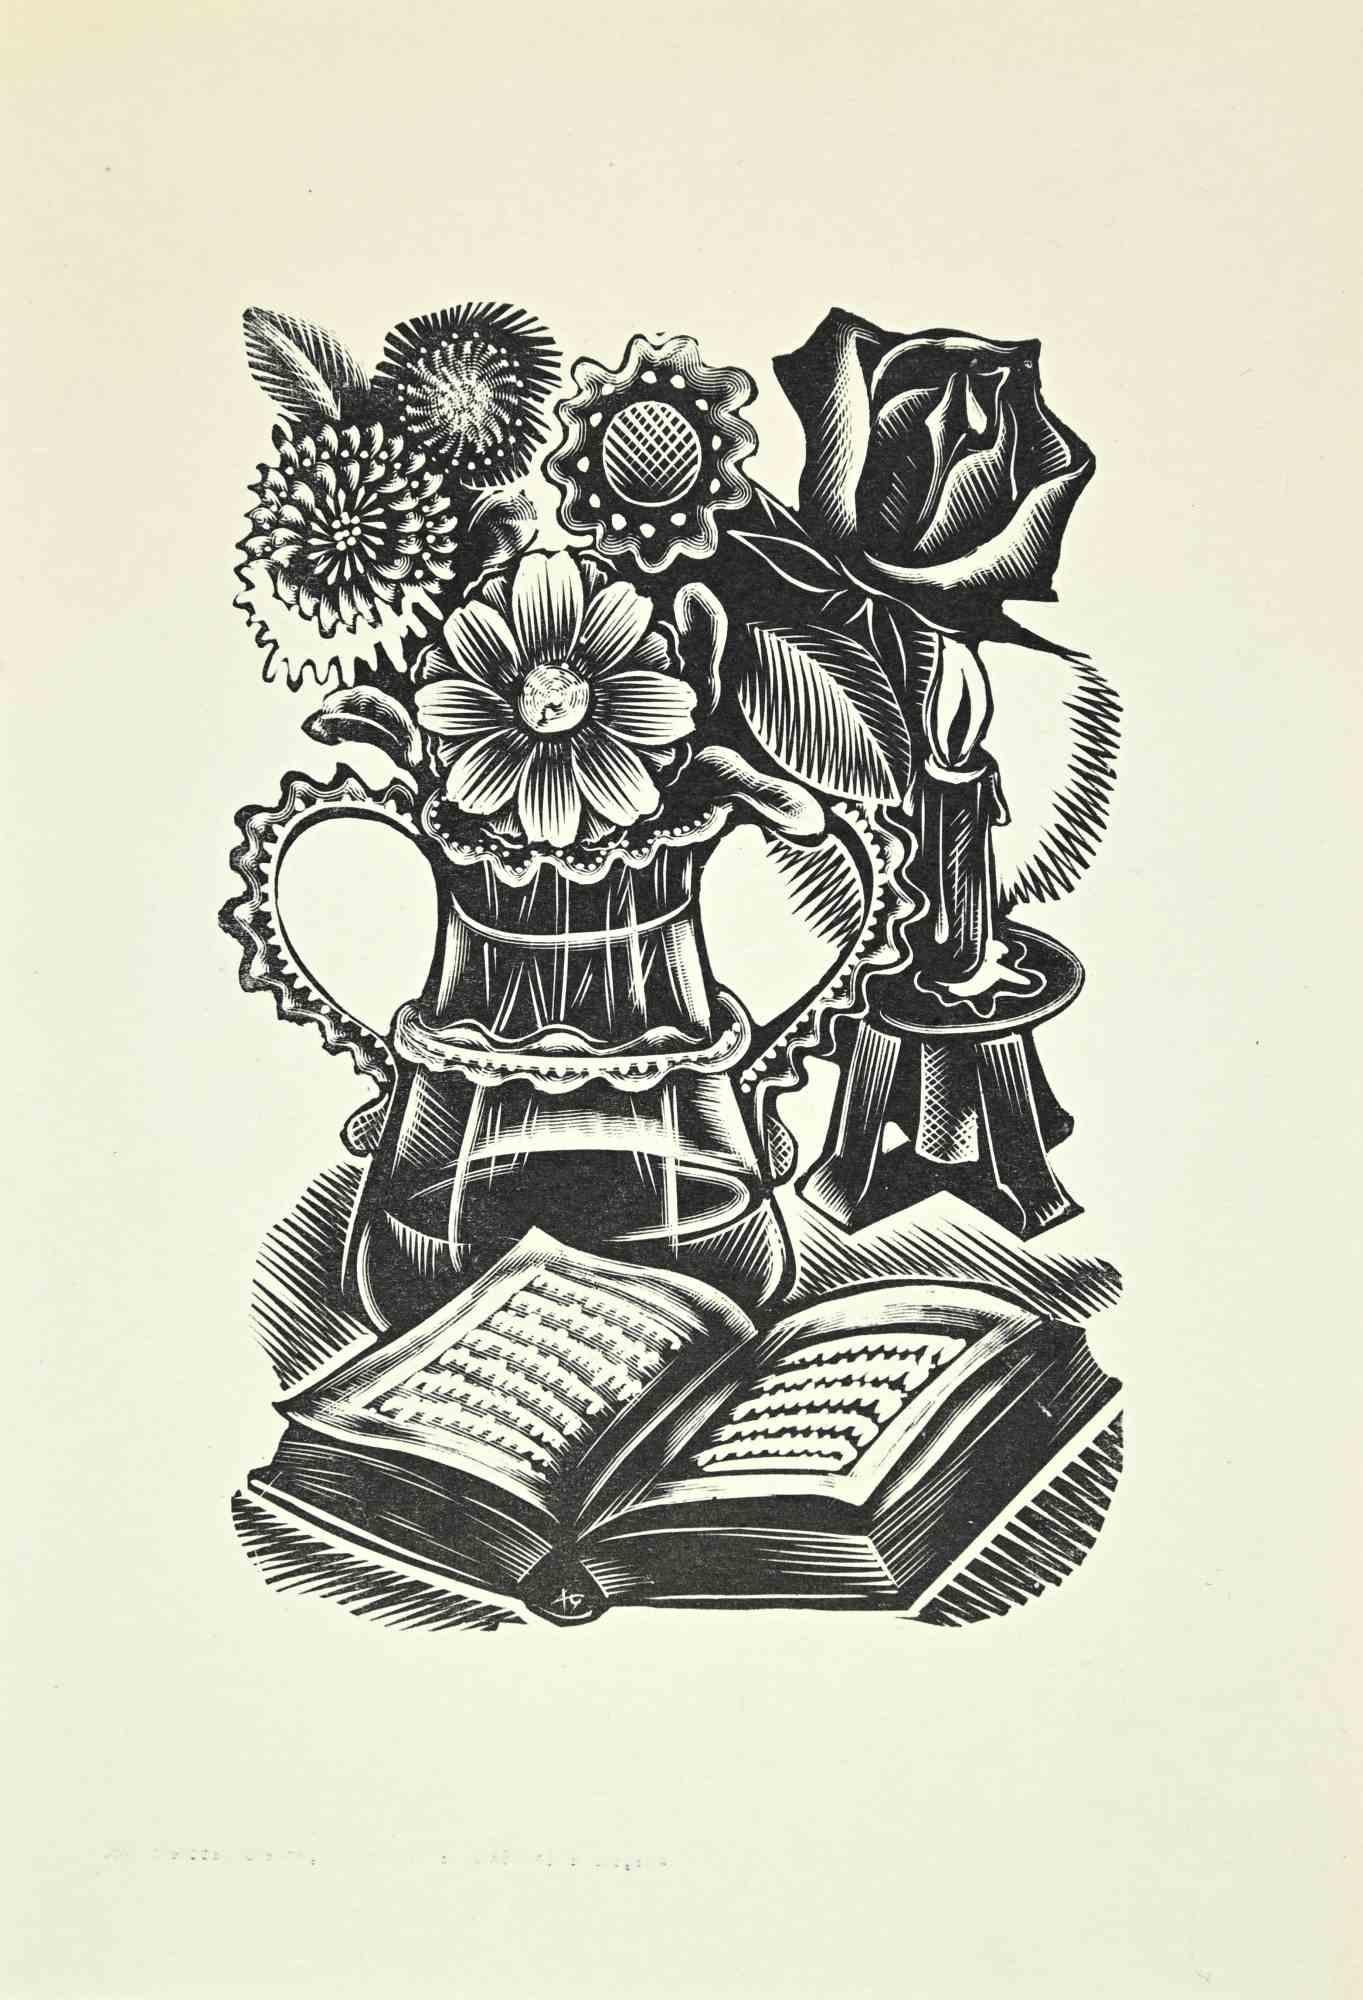 Ex Libris  is an Artwork realized in 1960, by the Artist Antonio Gelabert.

Woodcut print on ivory paper. Signed on plate and dated on back.

Good conditions.

The artist wants to define a well-balanced composition, through preciseness and congruous